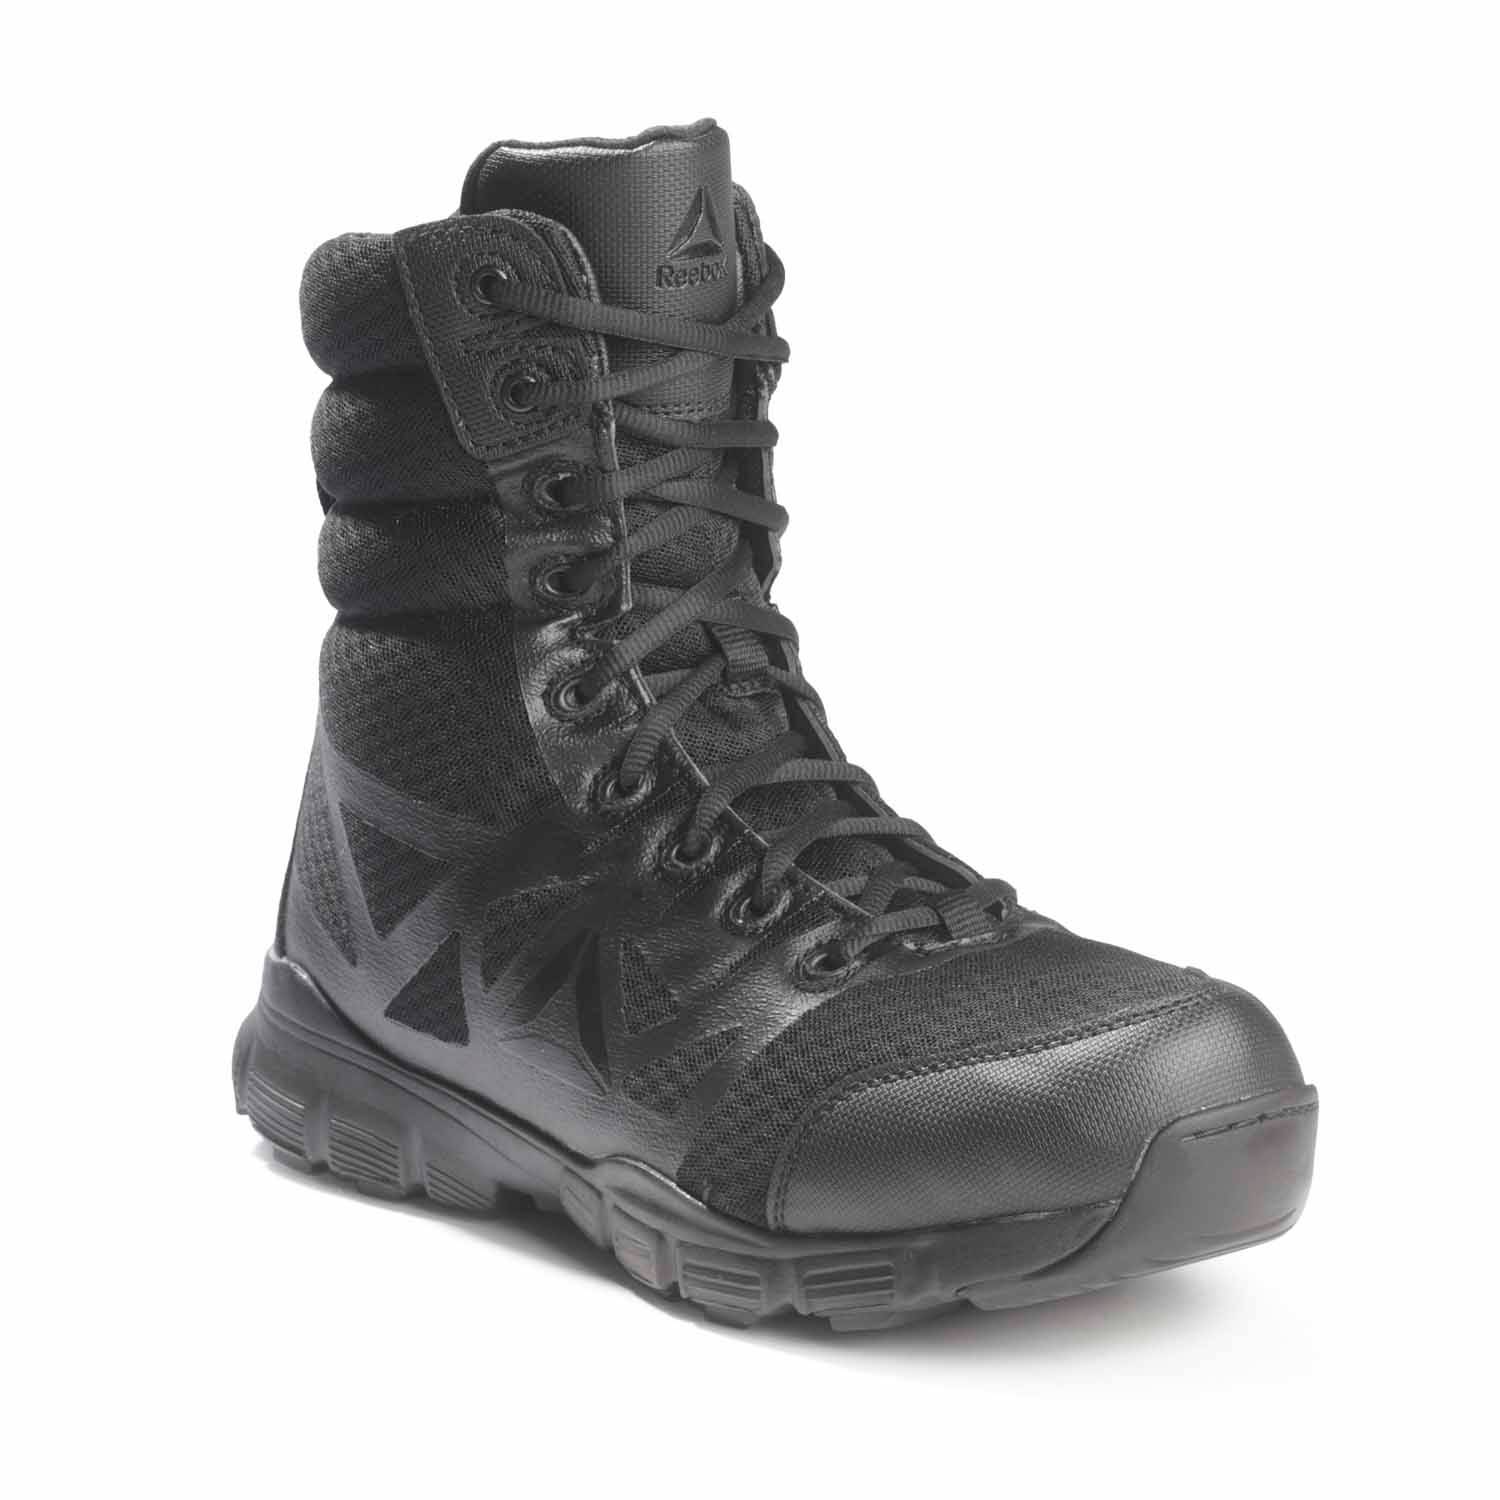 safety boots sale